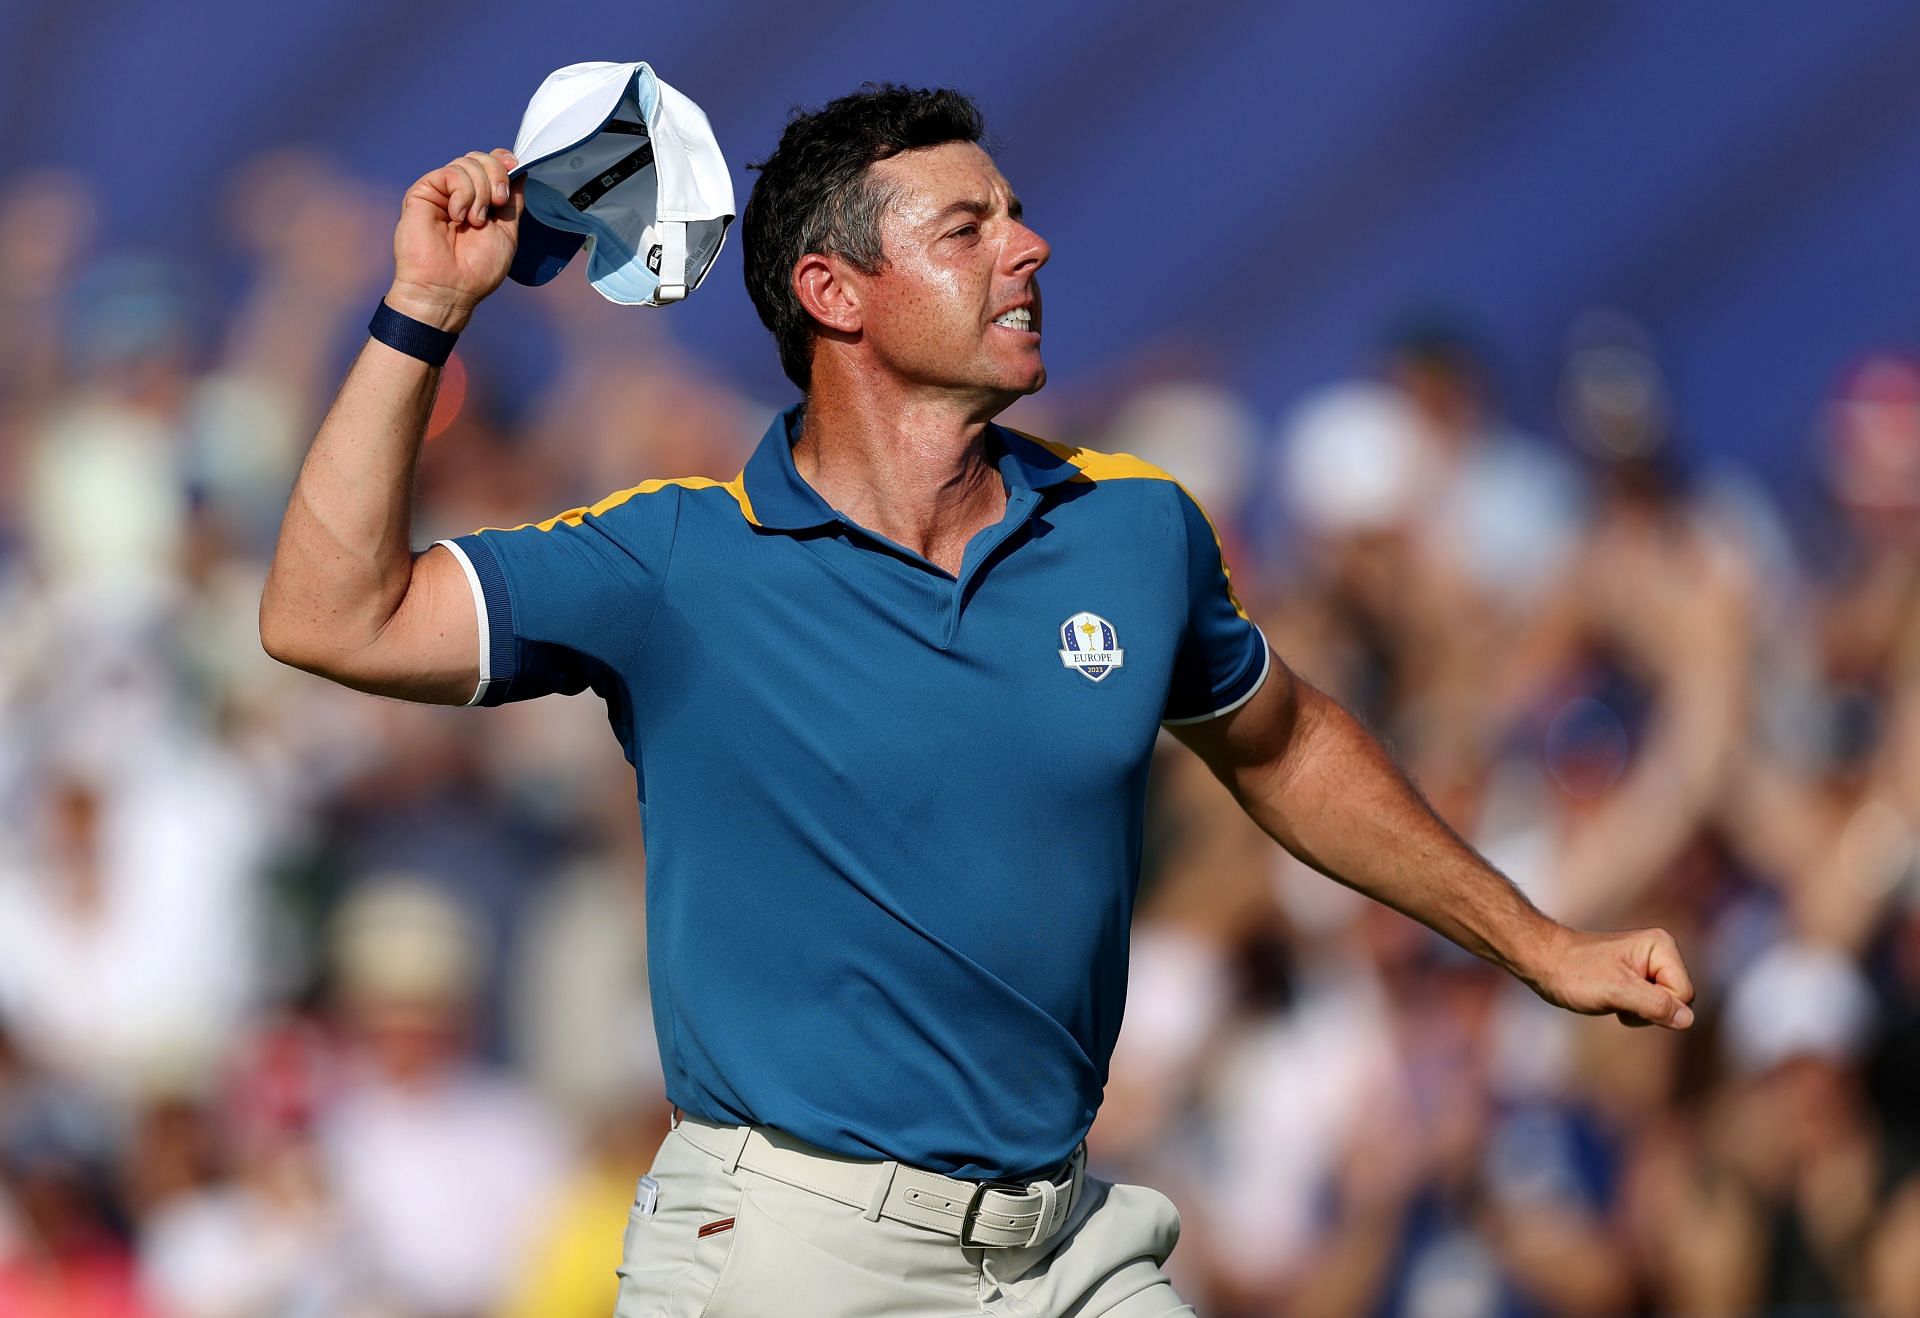 Rory McIlroy could join the Hero World Challenge